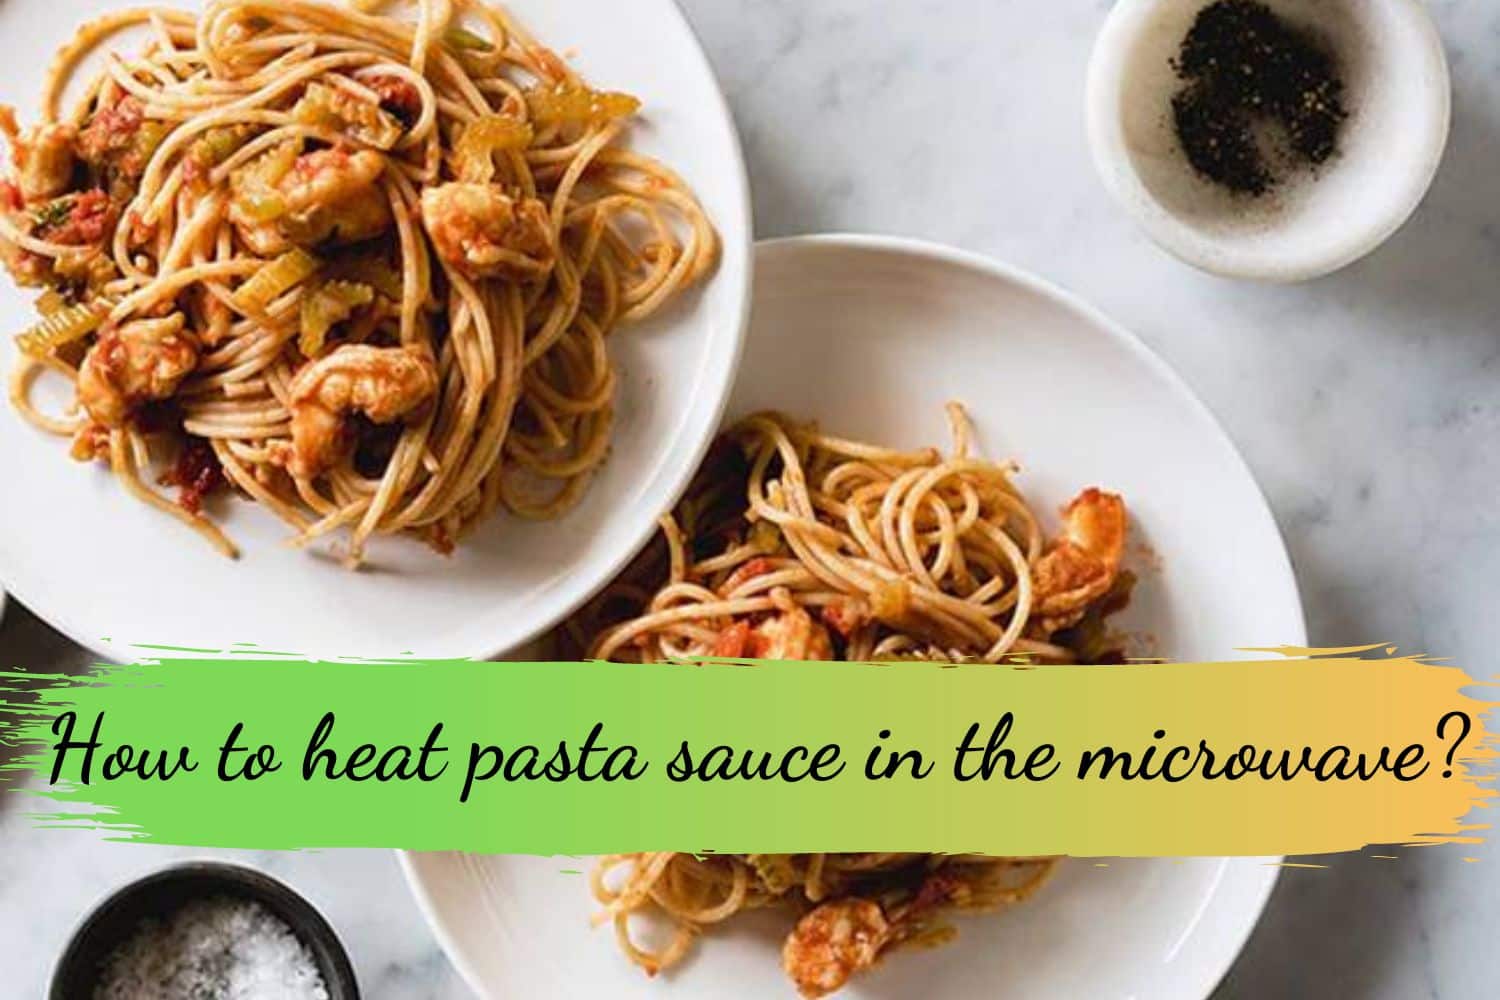 How to heat pasta sauce in the microwave?